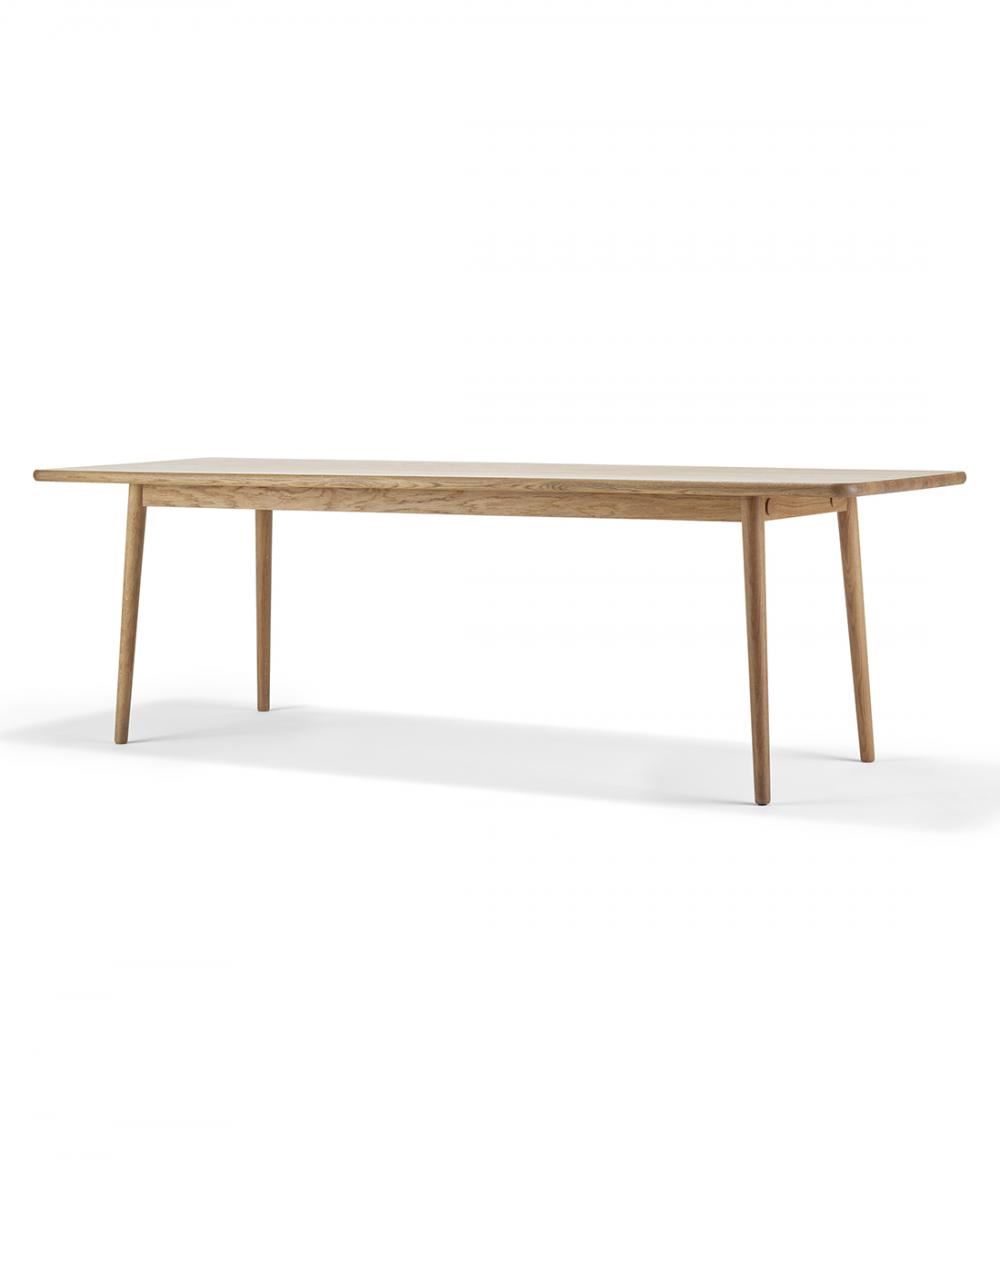 Stolab Miss Holly Table Rectangular Birch 235 X 82cm With 2 Extension Plates Light Wood Designer Furniture From Holloways Of Ludlow